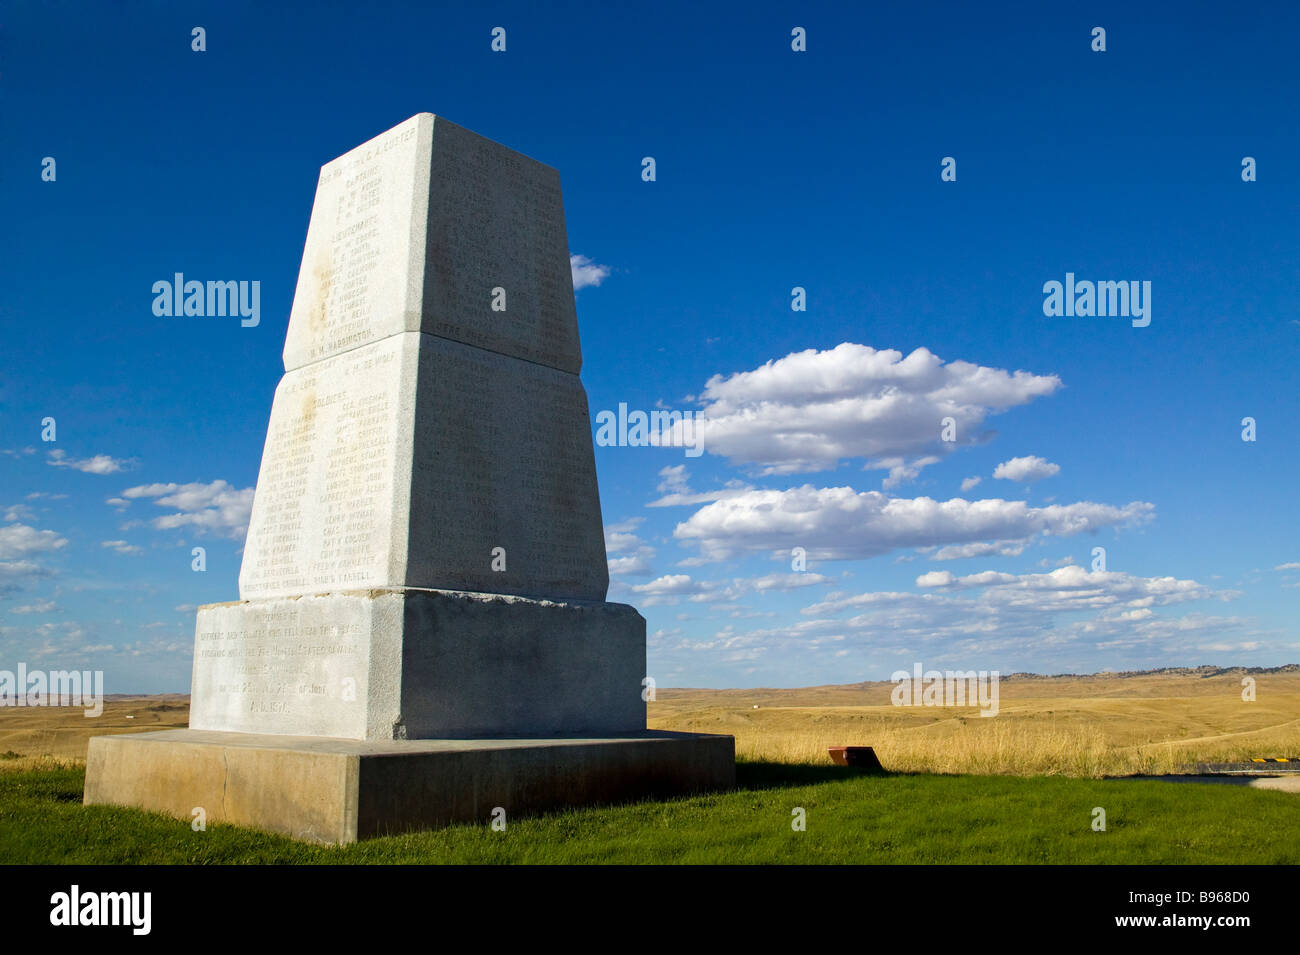 A memorial to Custer's last stand at Little Bighorn in Montana. Stock Photo